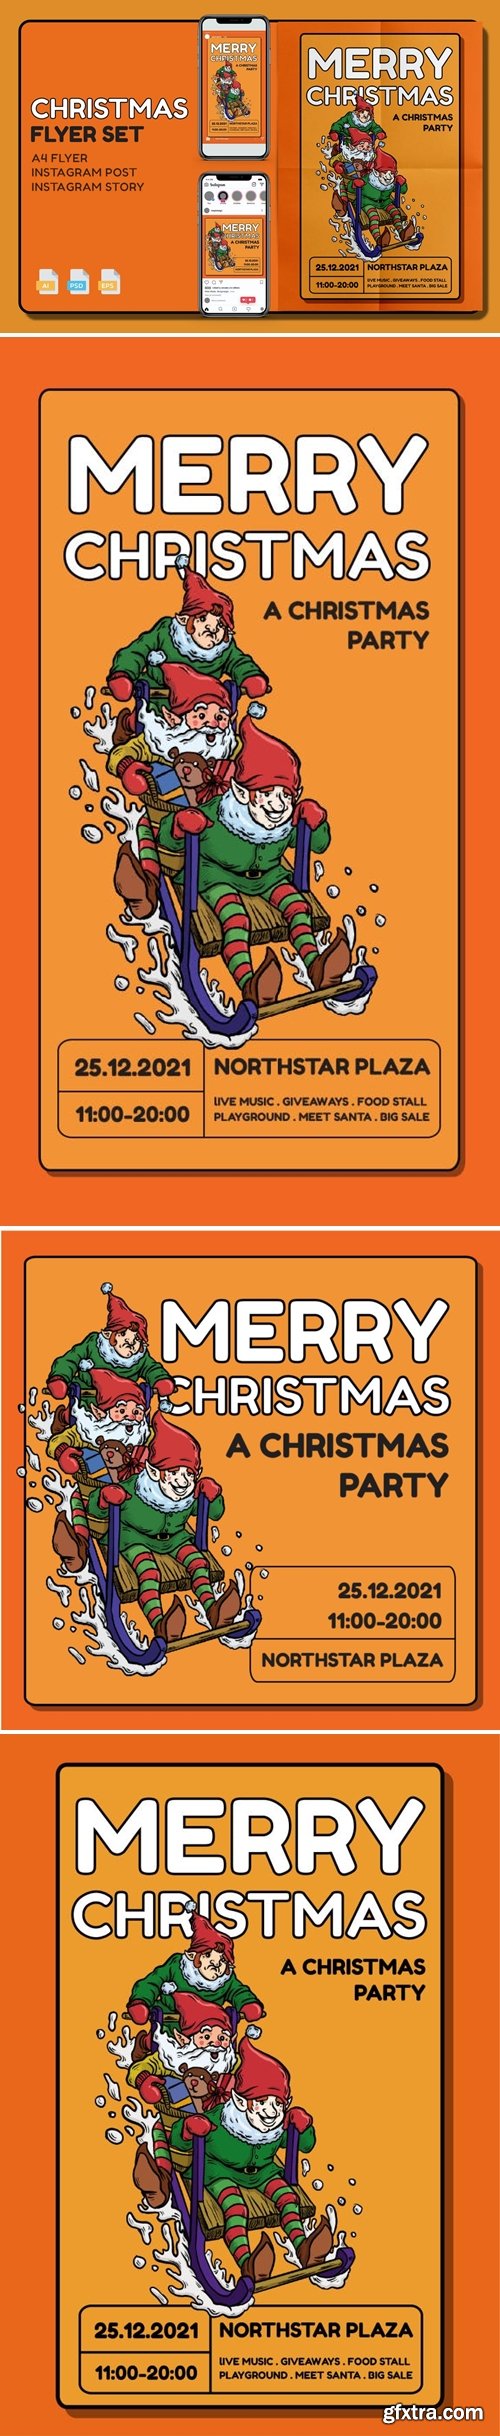 Christmass Flyer Set - Print and Social Media Pack